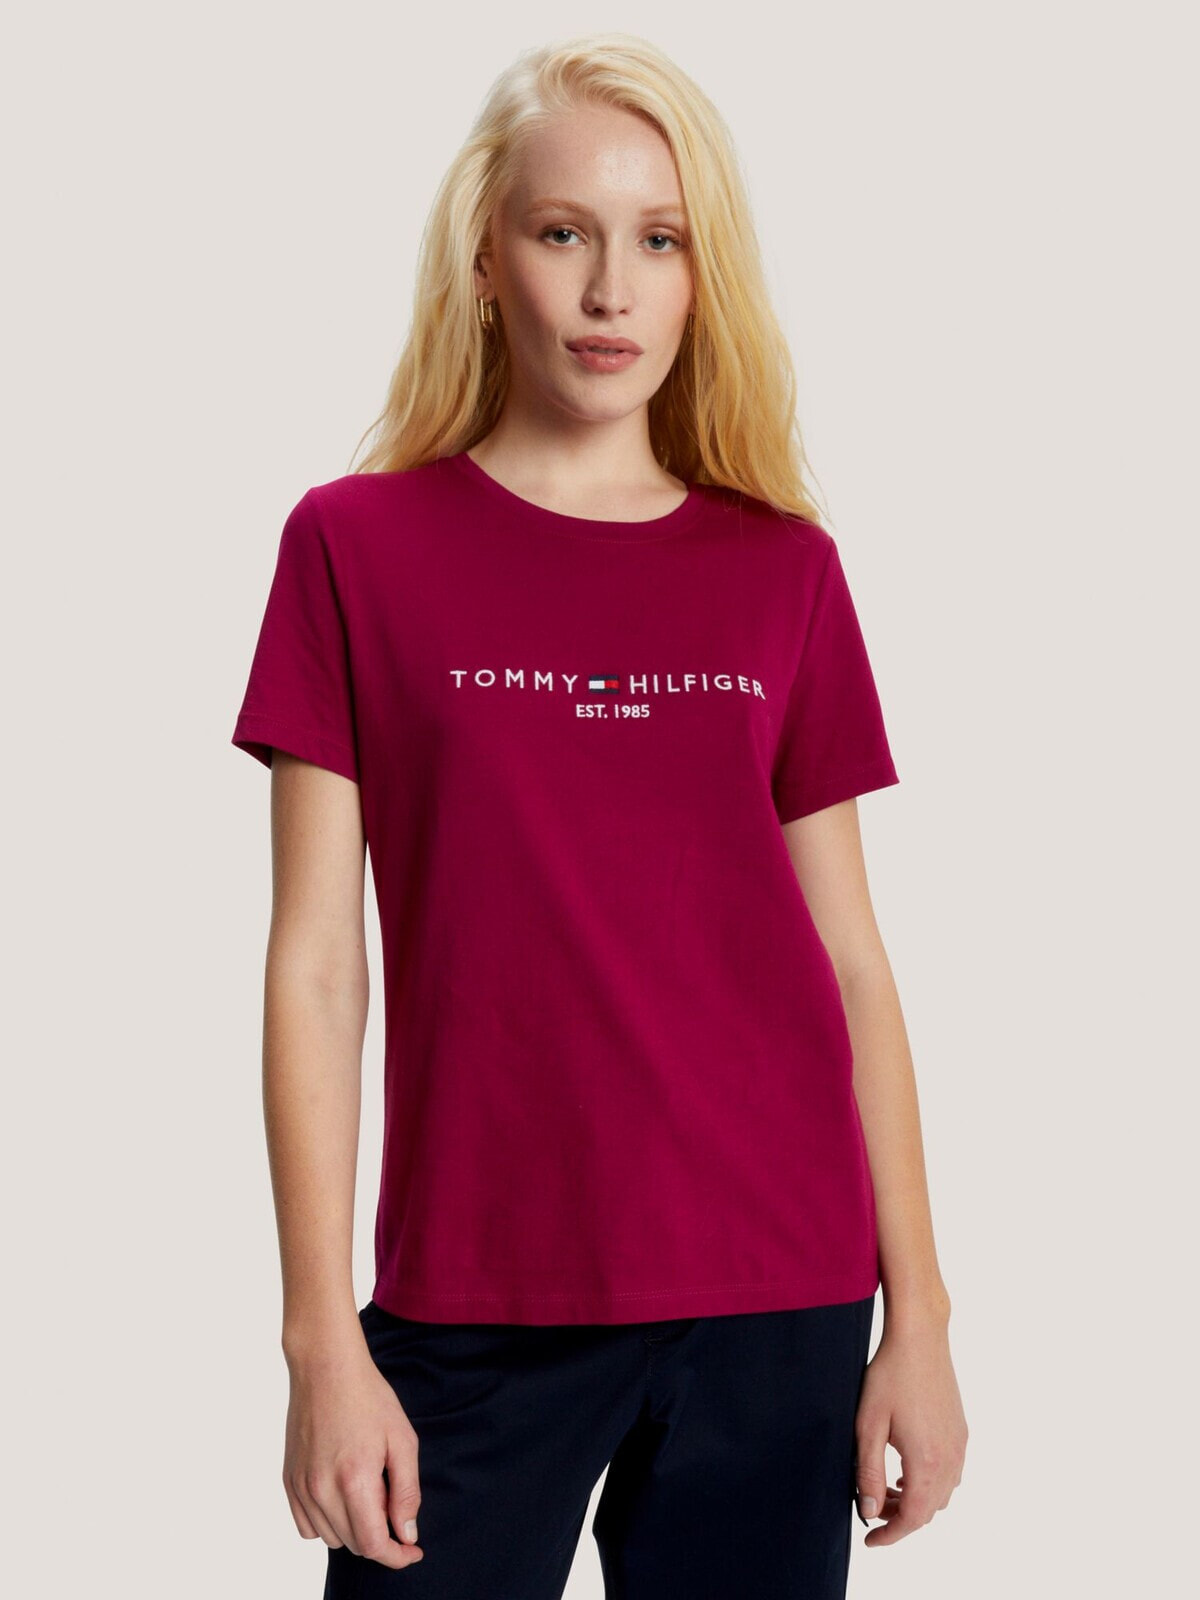 EMBROIDERED TOMMY LOGO T-SHIRT Tommy Hilfiger Размер: S купить от